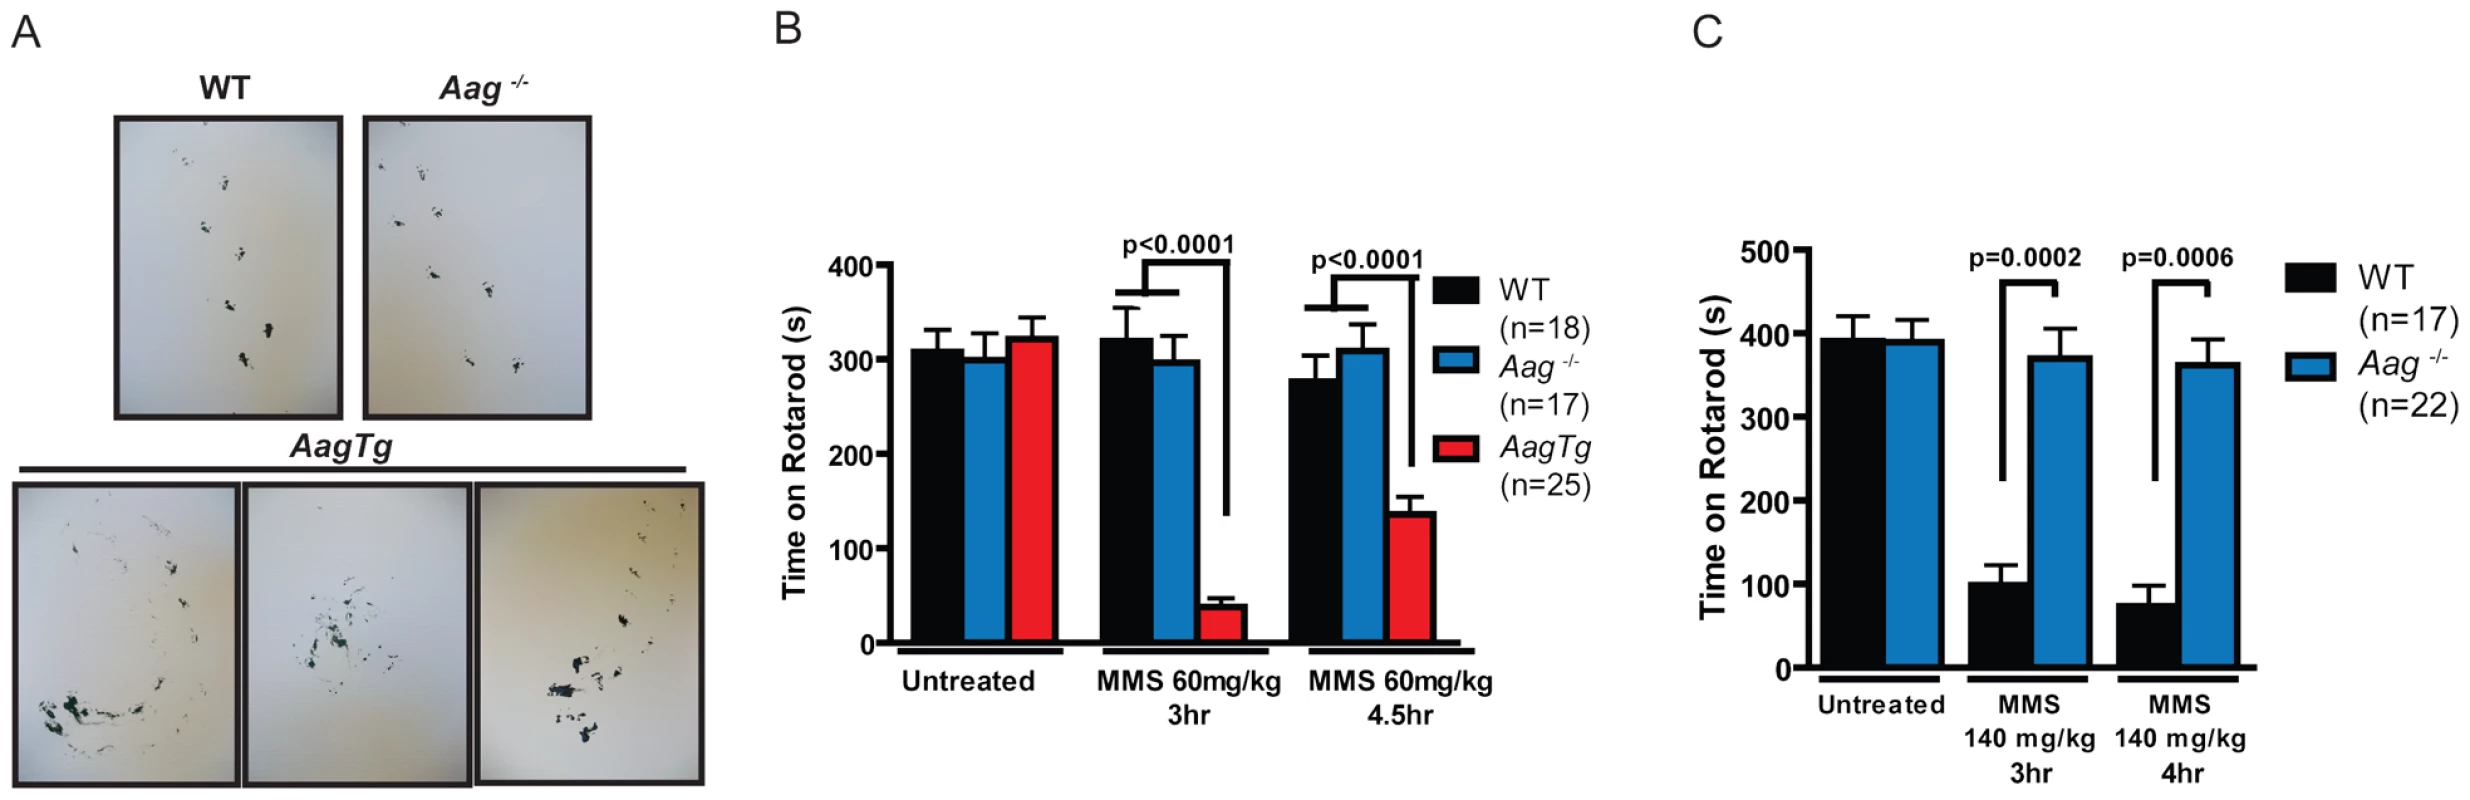 MMS induces an Aag-dependent decrease in motor function.